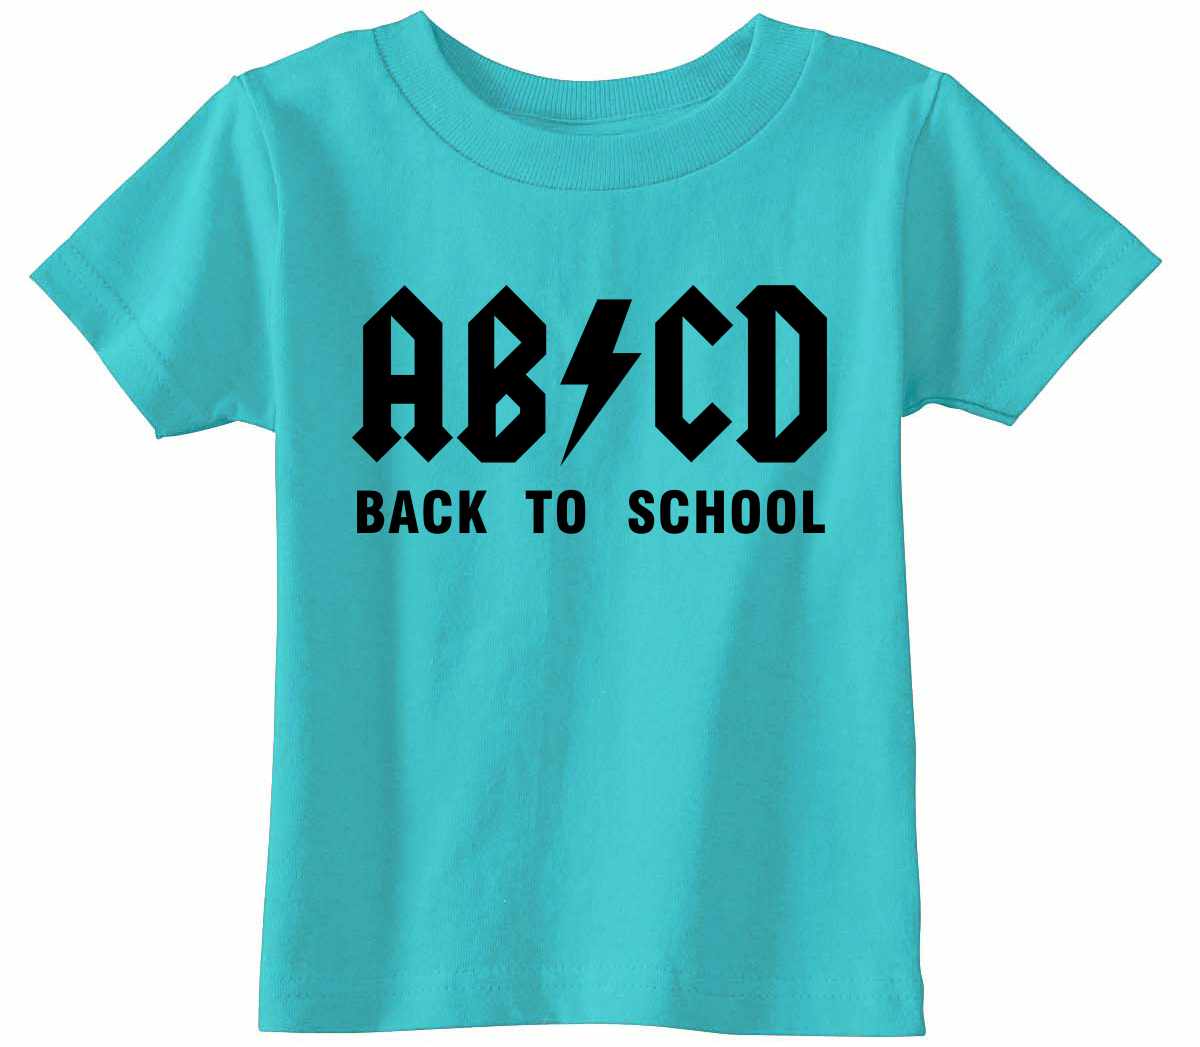 ABCD Back To School on Infant-Toddler T-Shirt (#1295-7)